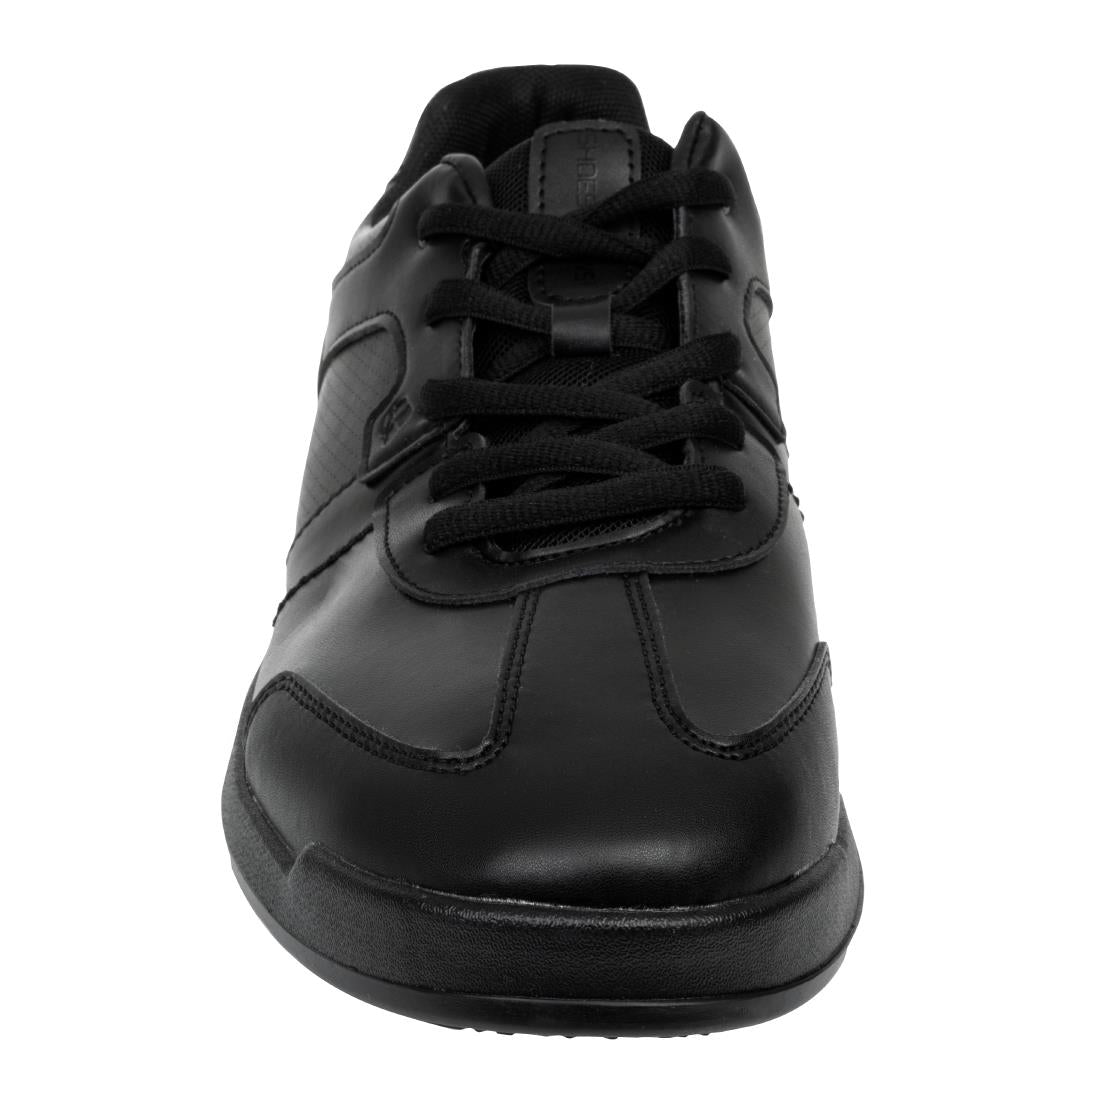 BB585-39 Shoes for Crews Freestyle Trainers Black Size 39